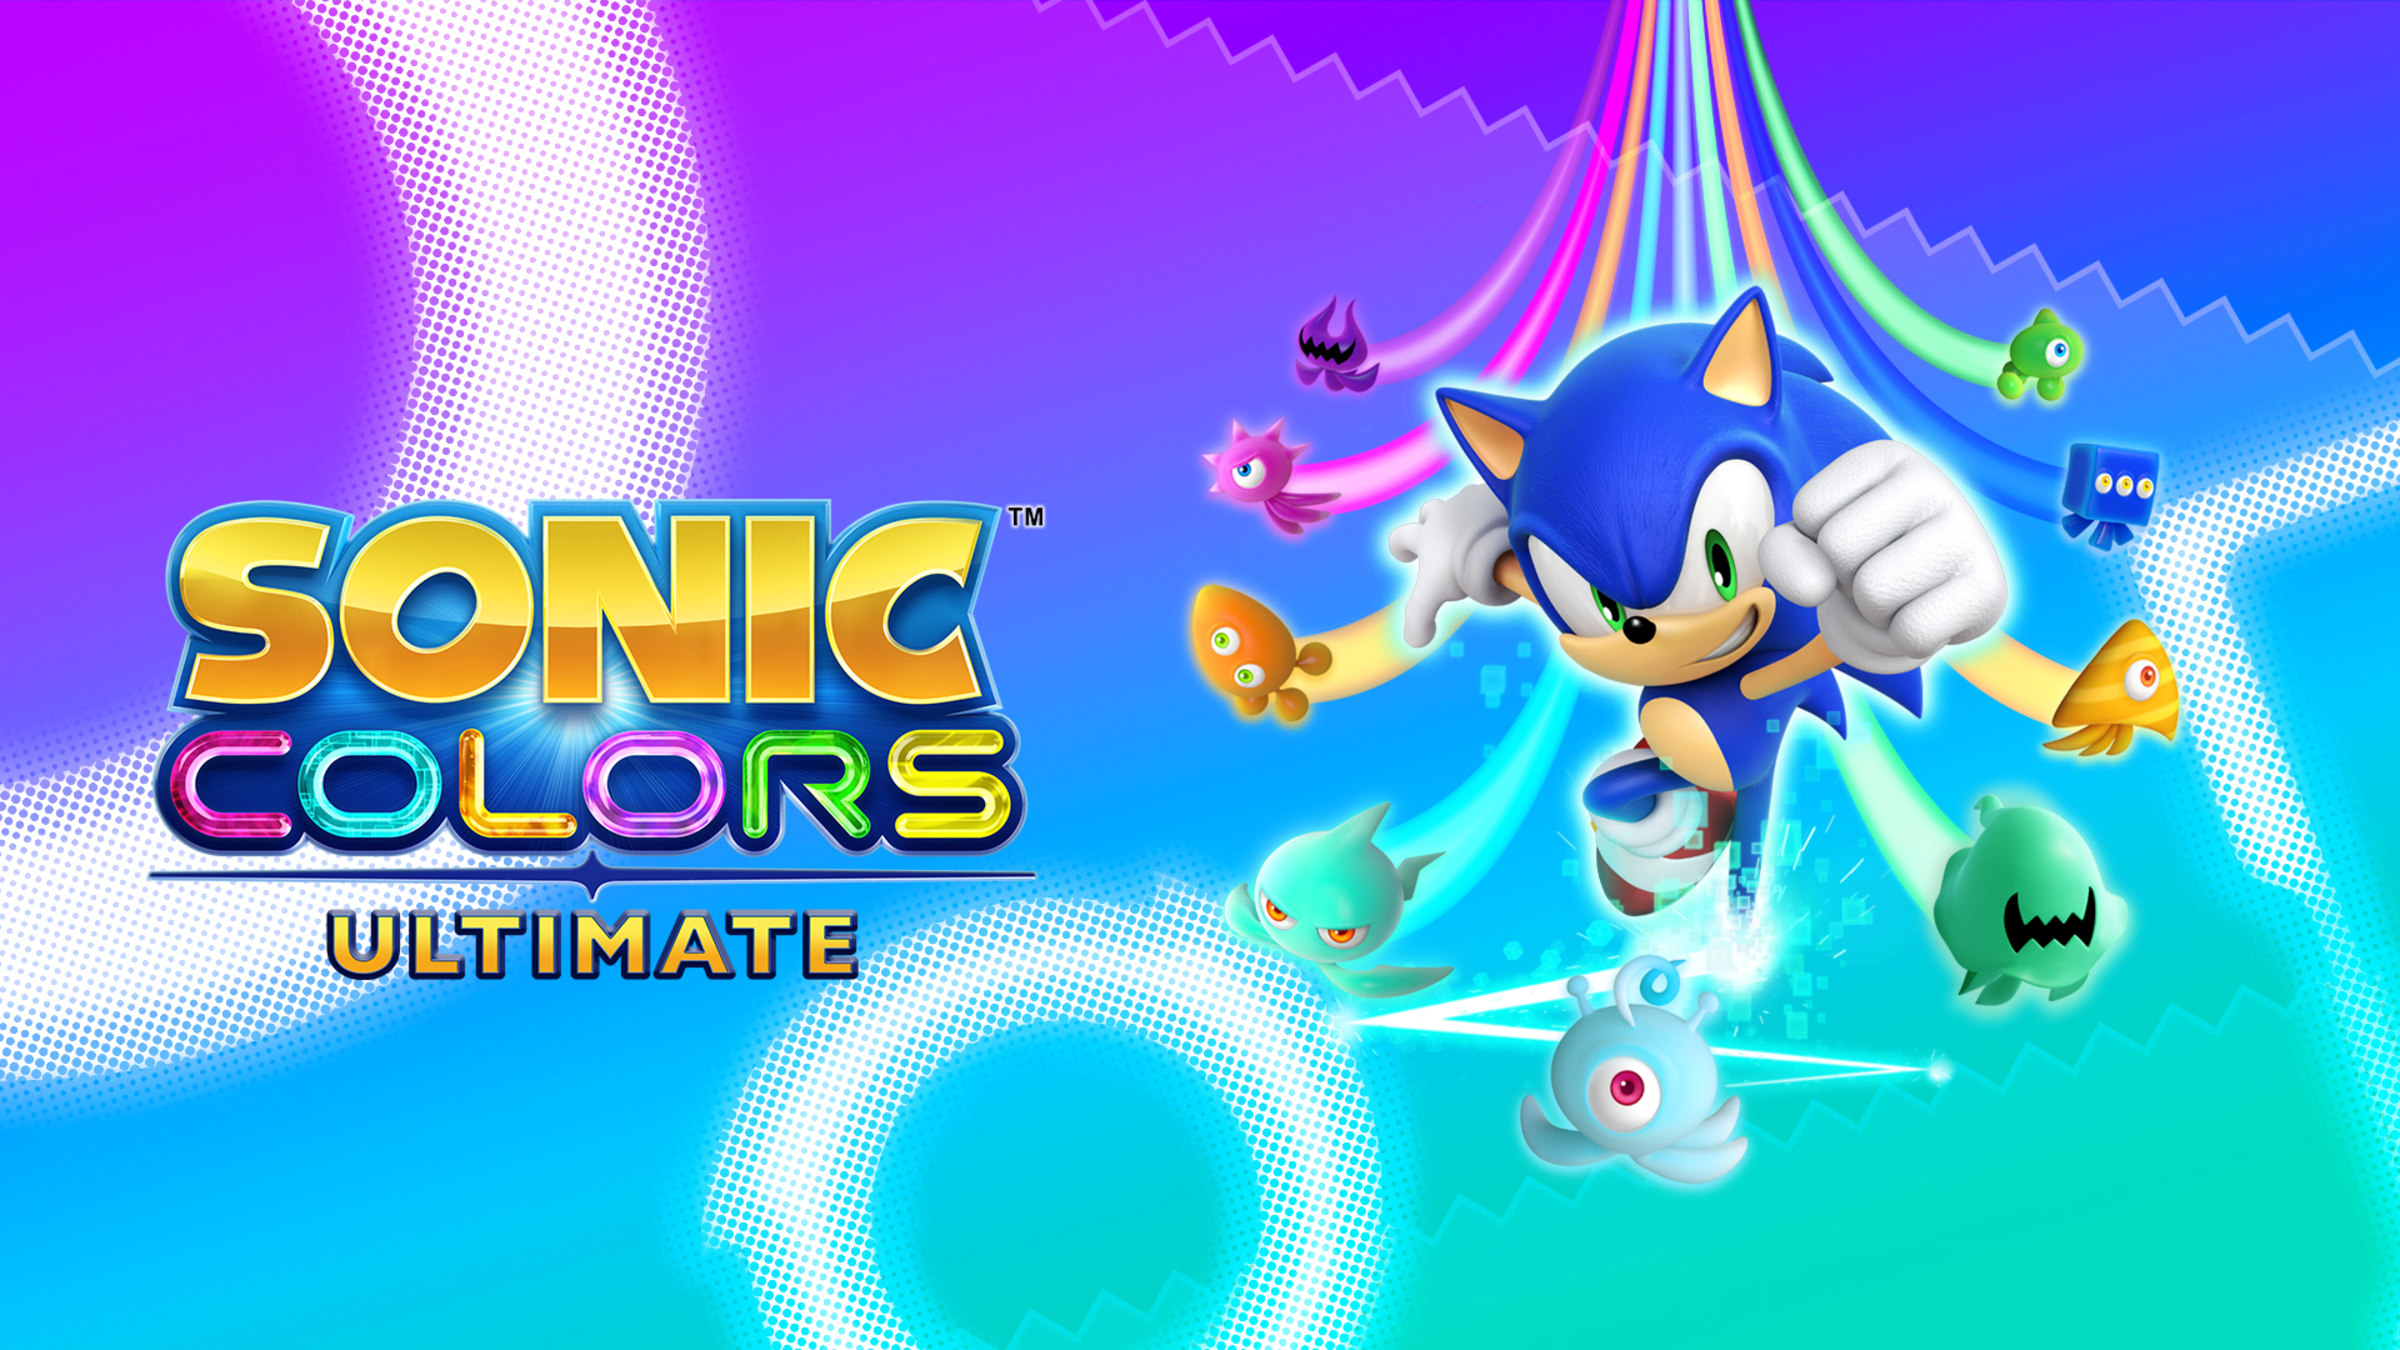  Sonic Colors Ultimate: Standard Edition - Nintendo Switch